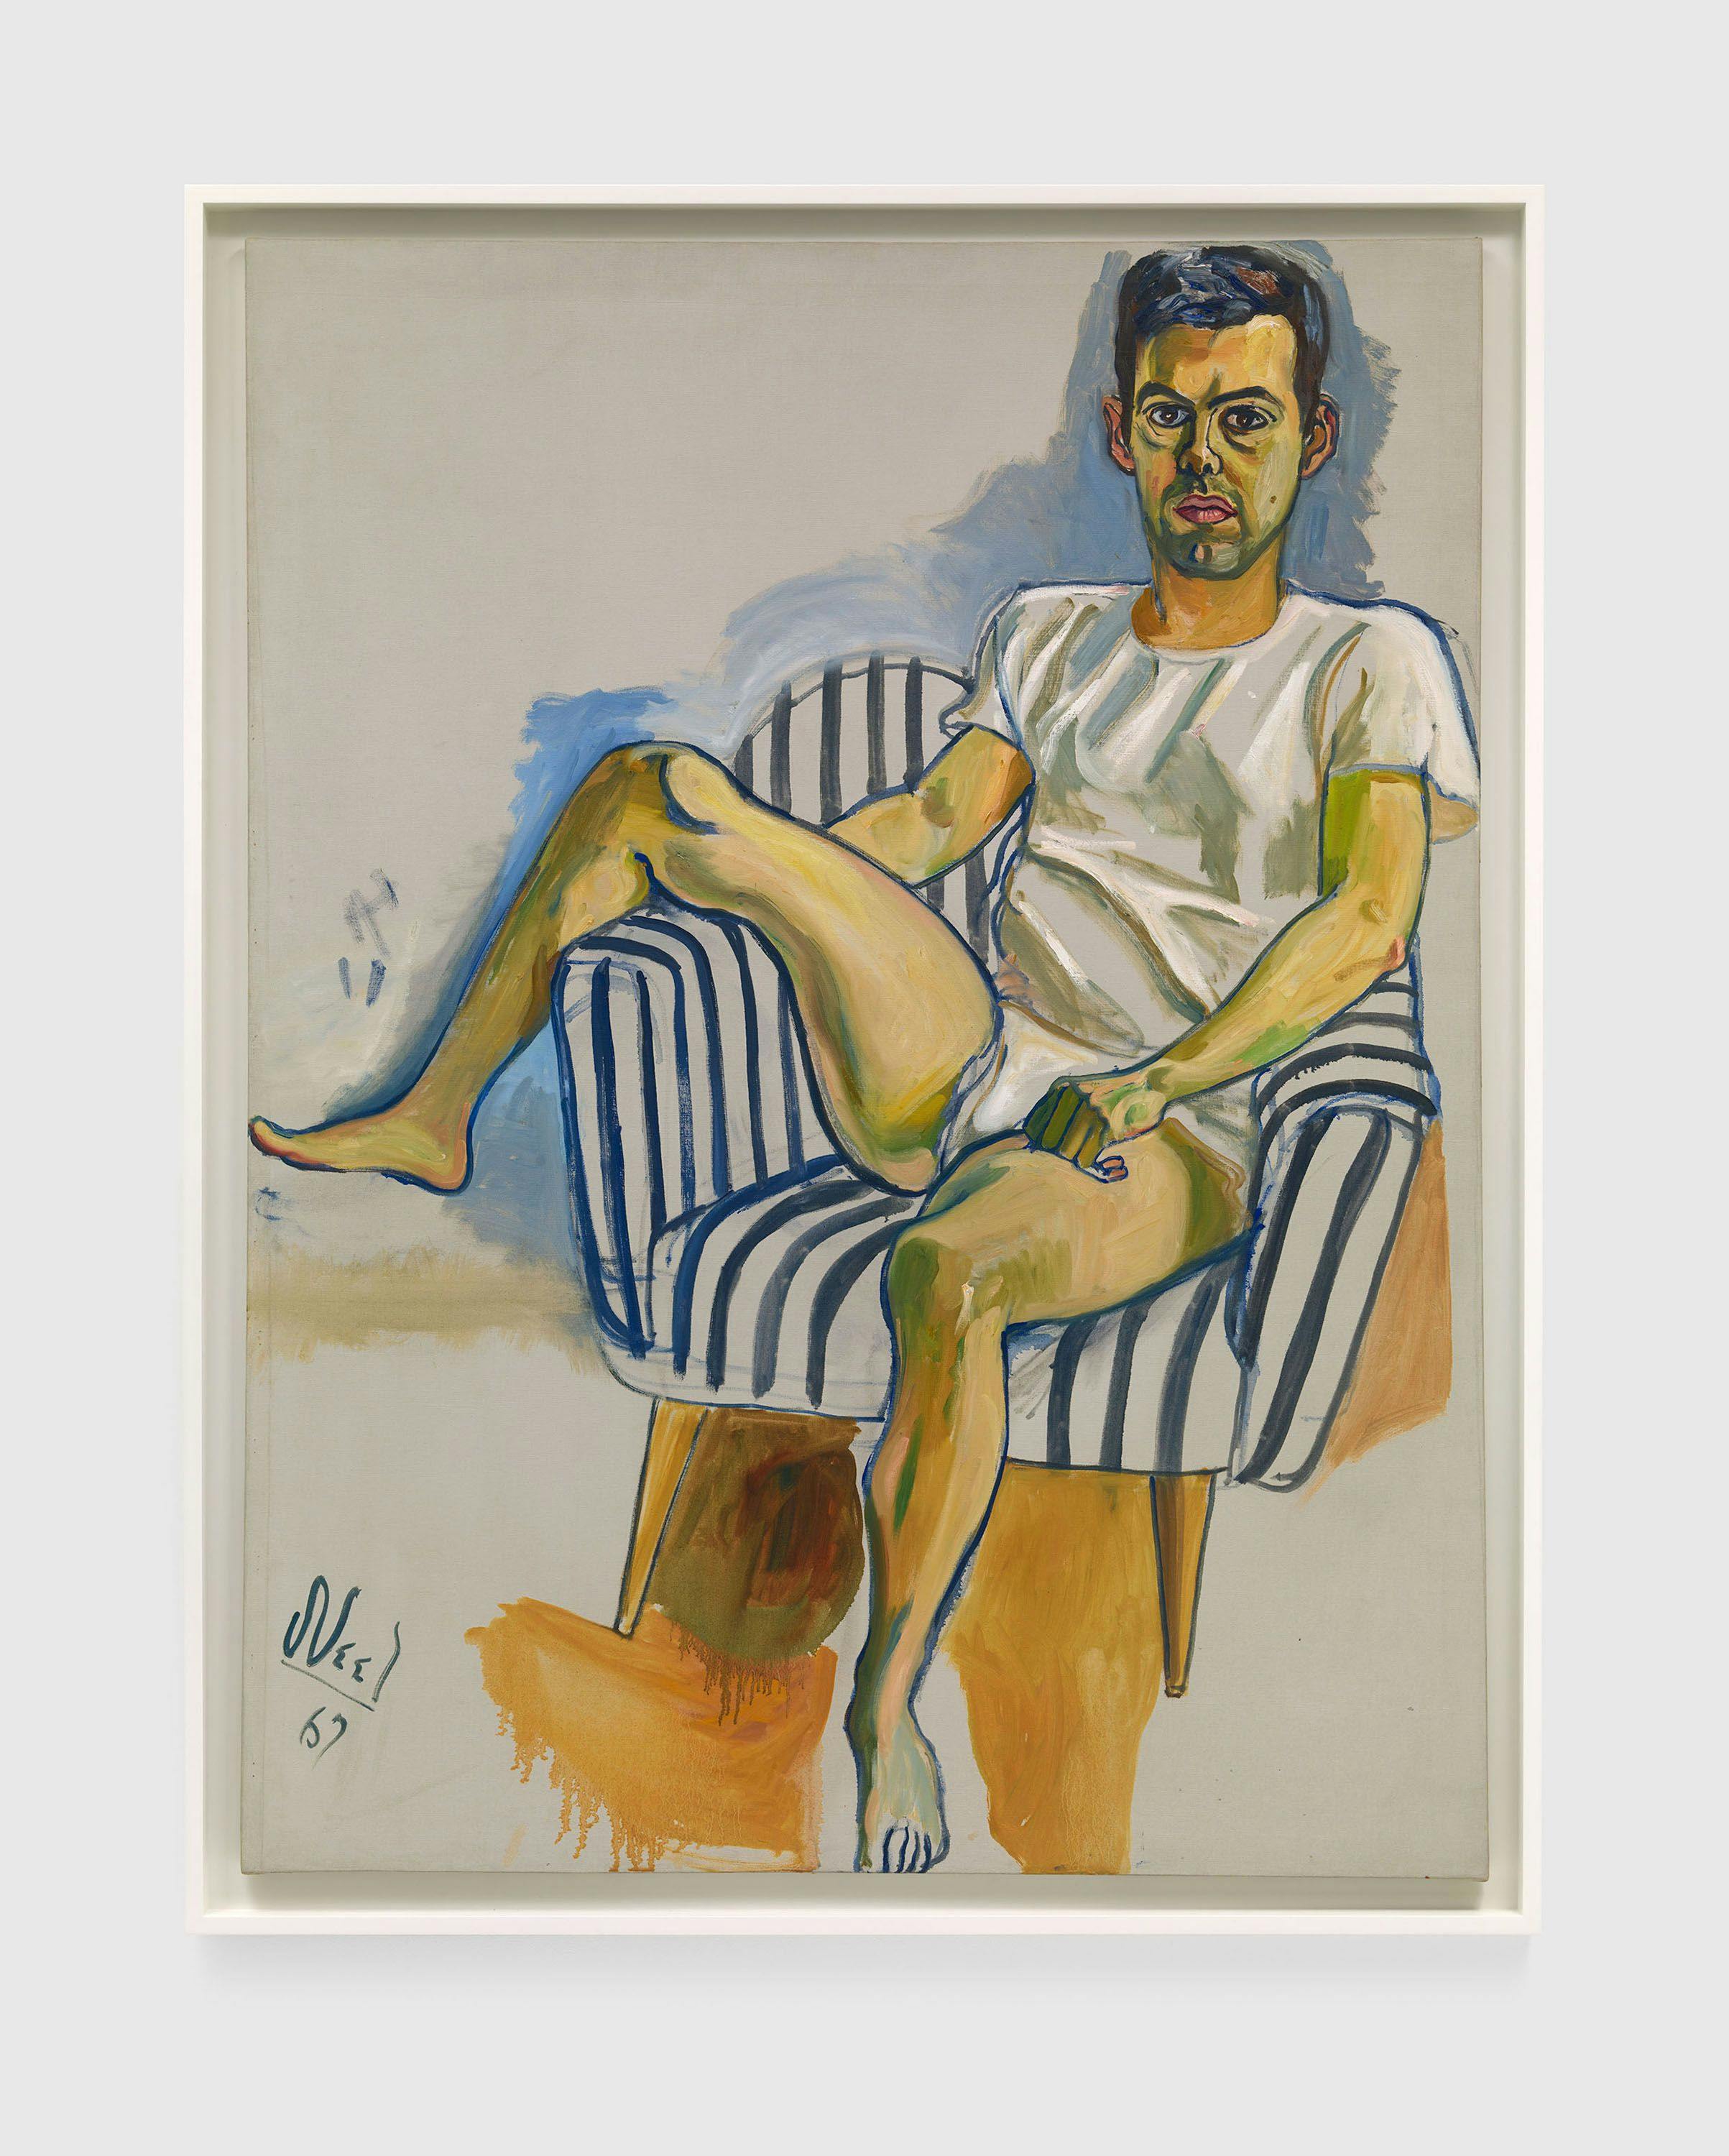 A painting by Alice Neel, titled Richard, dated 1967.